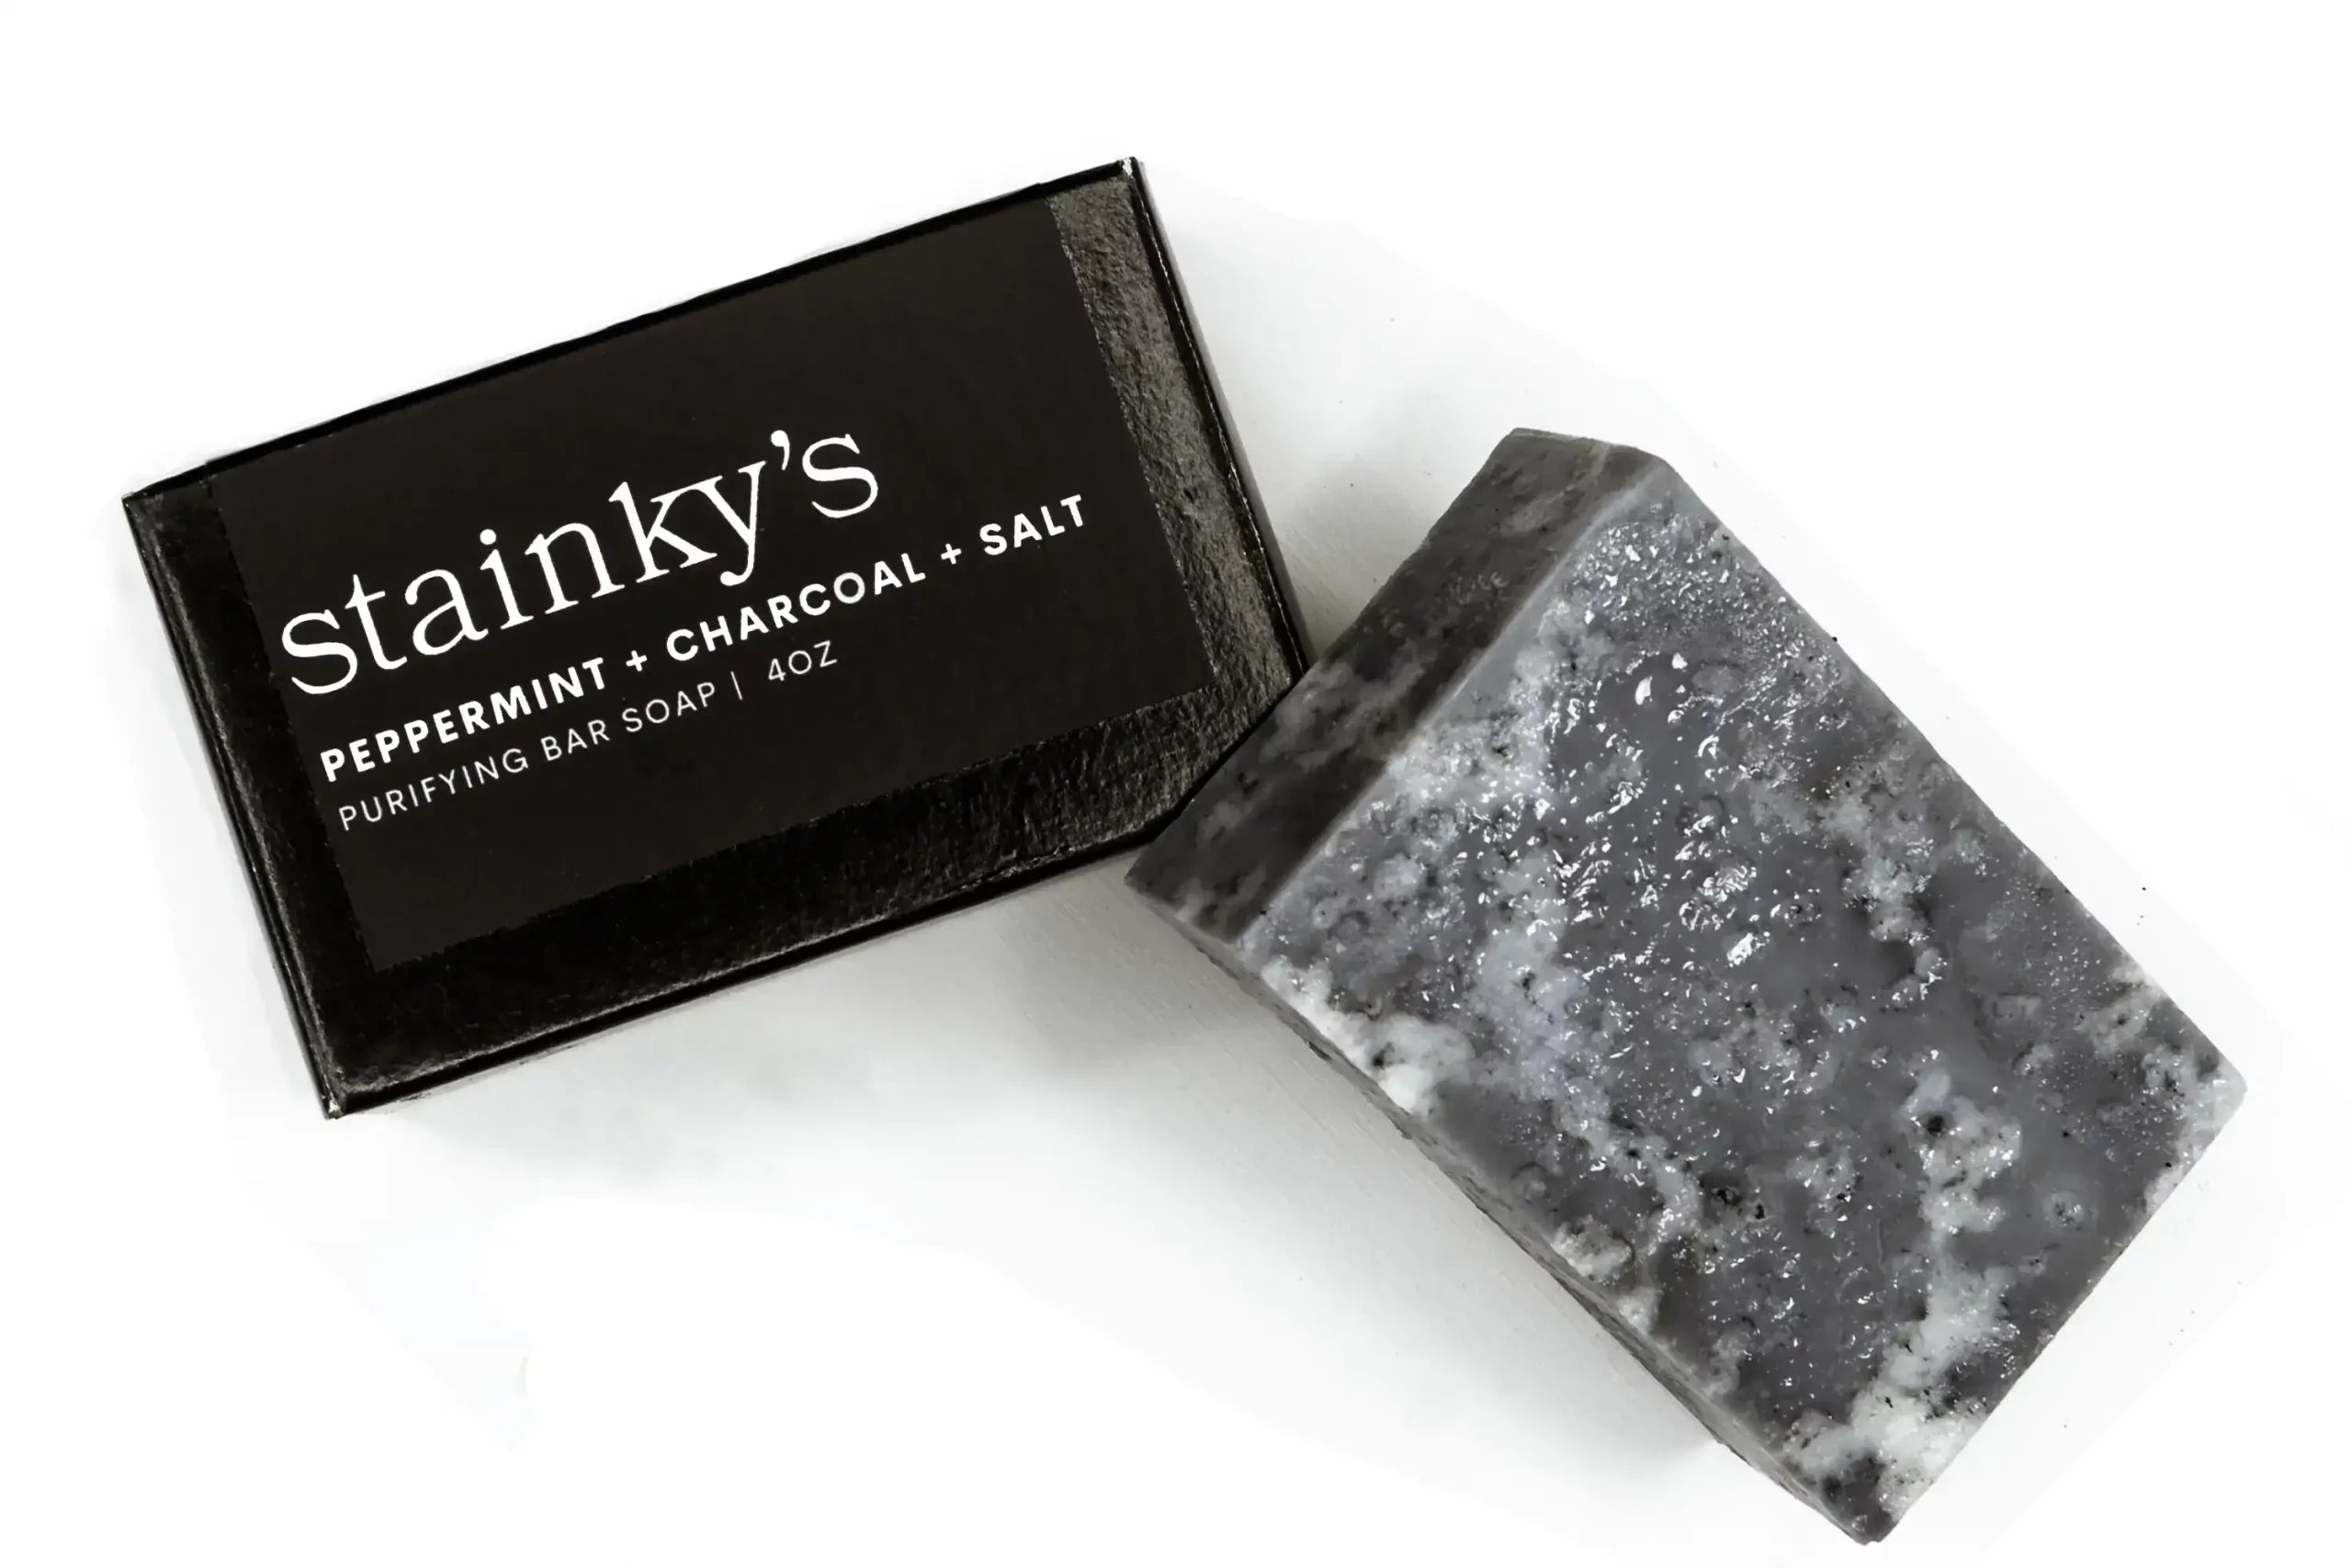 Purifying charcoal bar soap. With peppermint and black salt. Exfoliate, detox, and moisturize. Best used before Pit Prep deodorant primer. 